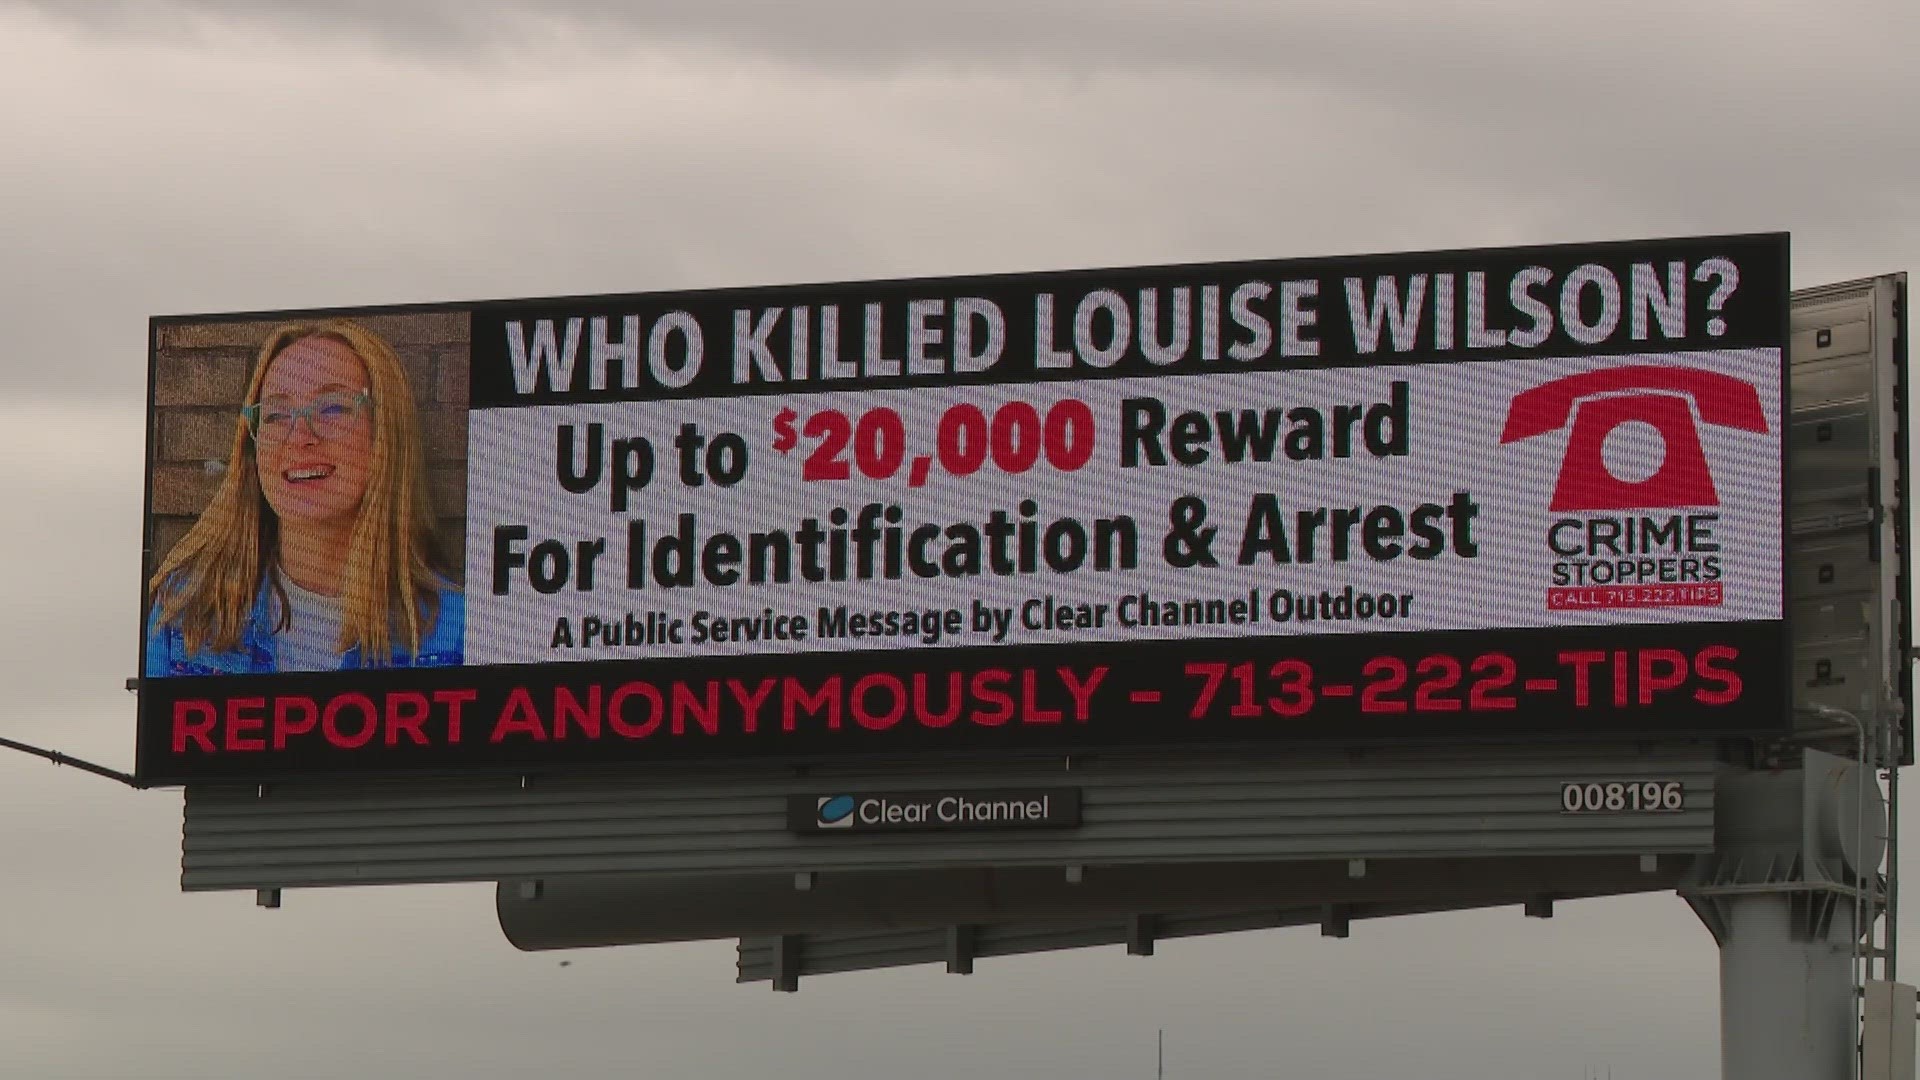 Louise Wilson, 17, was shot in the heart around 1 a.m. on  Sunday, Dec. 10, on the Pierce Elevated portion of I-45. Her killer is still out there.